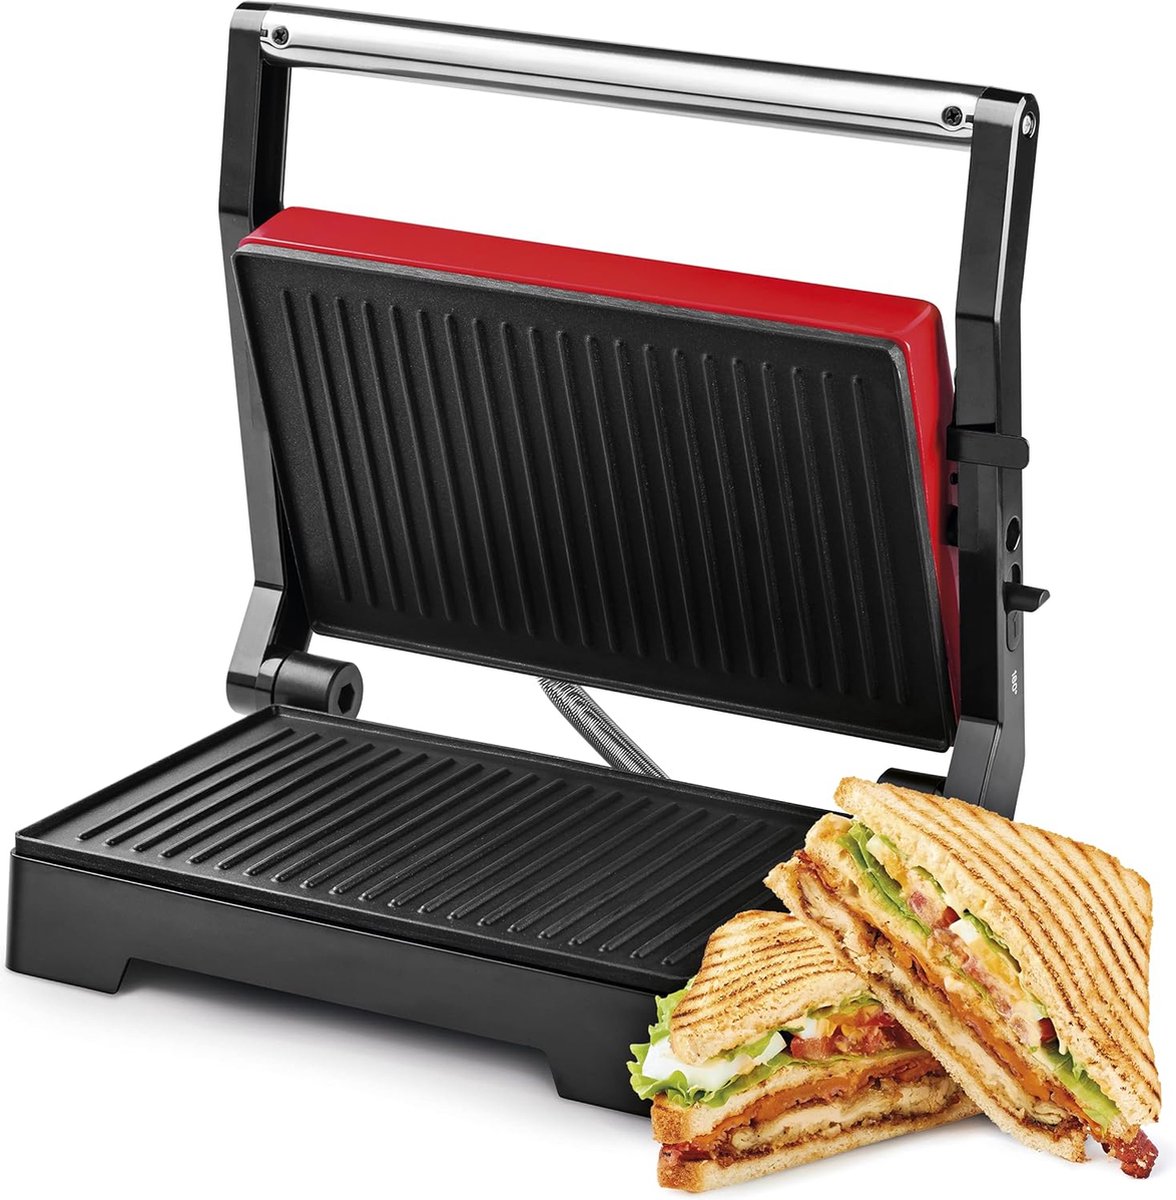 Royalty Line® PM1000 Tosti Apparaat - Kleine Contactgrill - Panini Grill - 1000W - Toaster Grill - 23 x 15 cm - Tosti Ijzer - Grill Apparaat - Rood - Royalty line